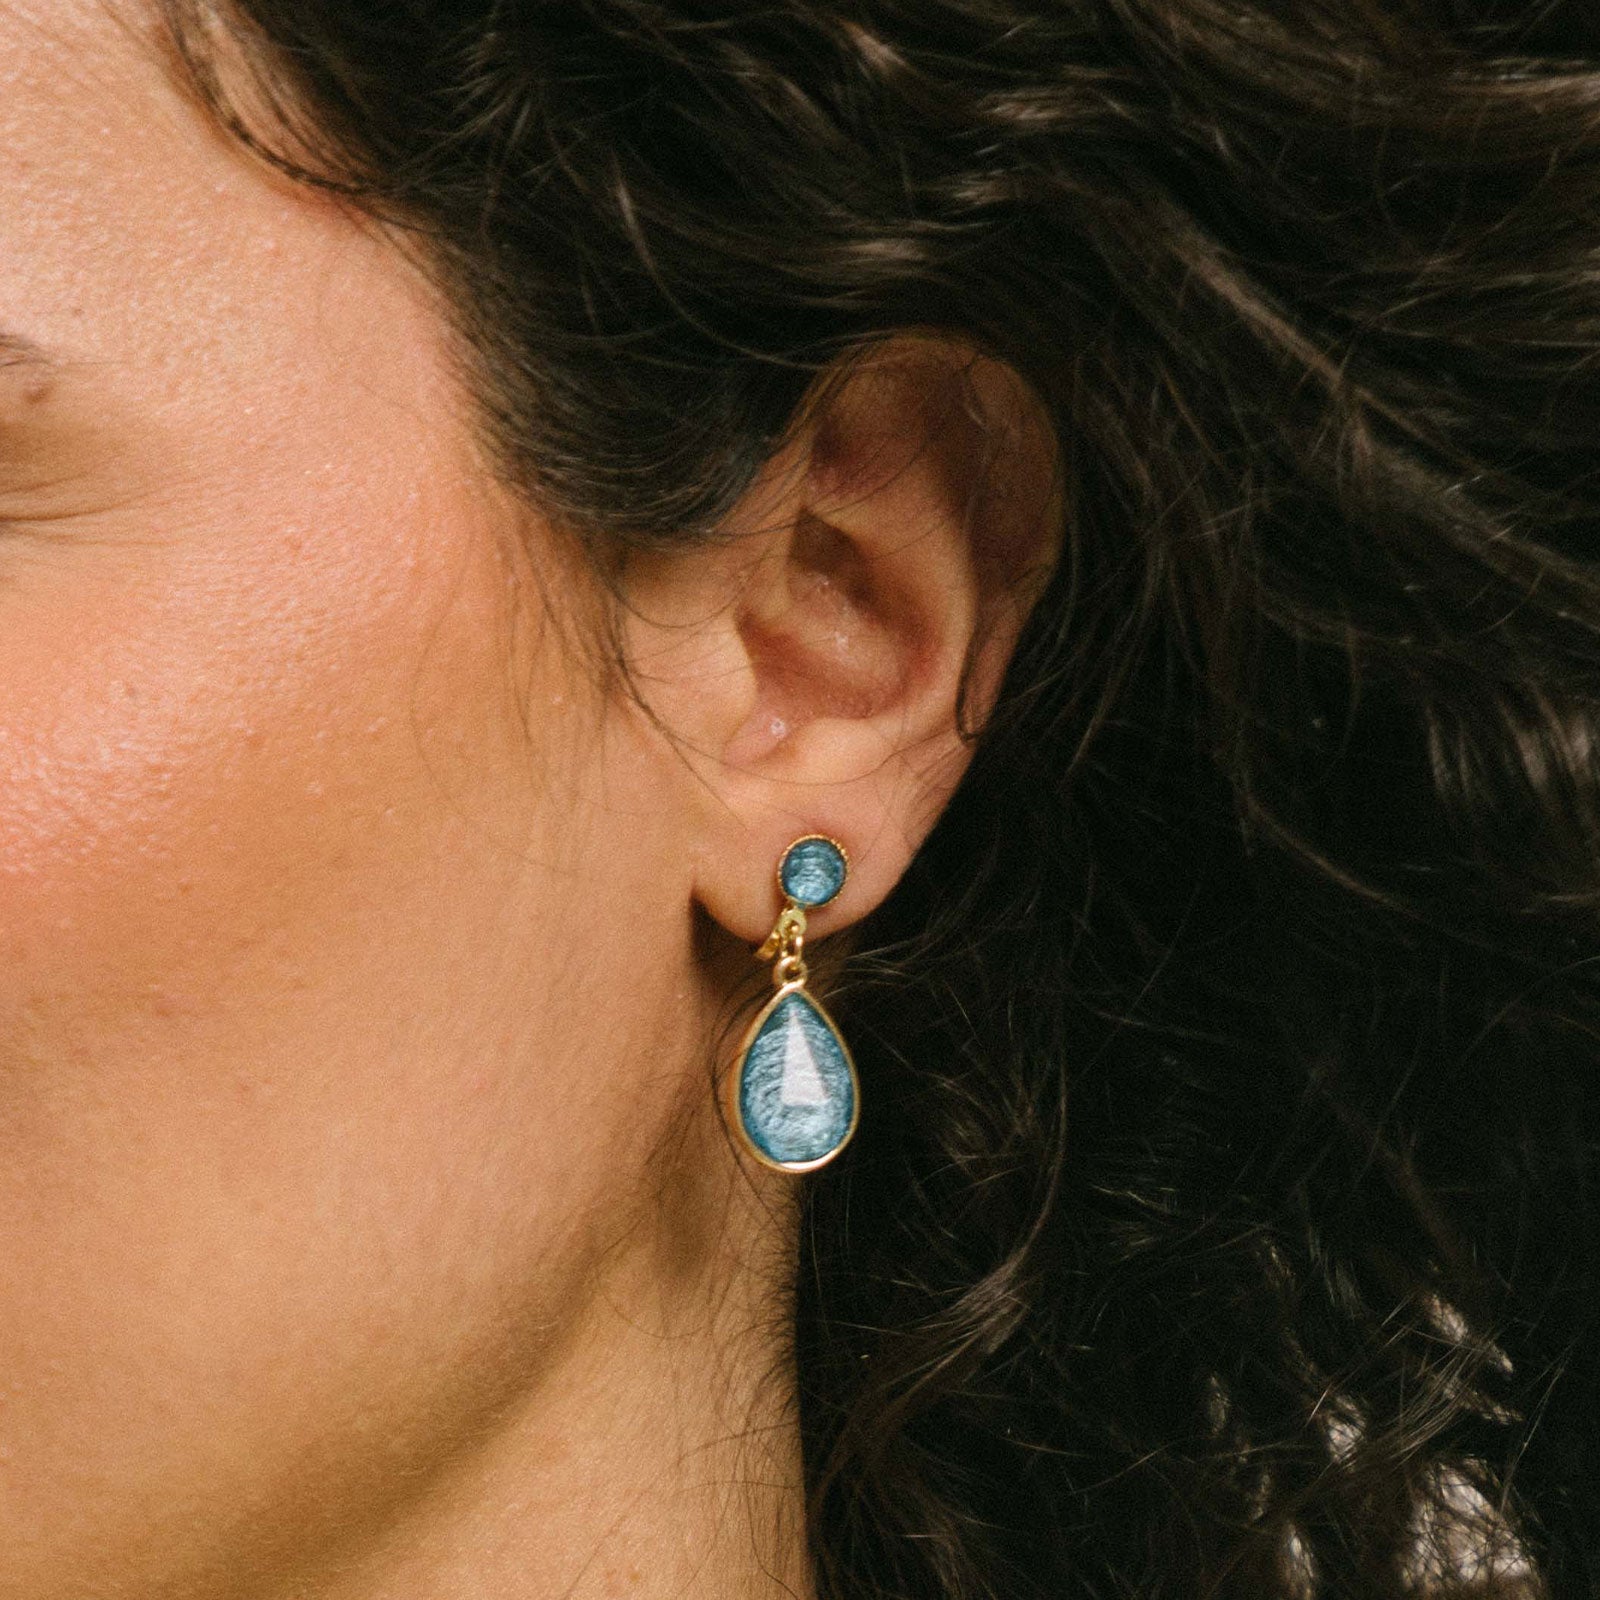 A model wearing the Sabrina Blue Tear Drop Clip-On Earrings feature a padded clip closure, making them ideal for all ear types. The earrings offer secure hold for up to 8-12 hours and are constructed of resin and gold tone plated zinc alloy. For extra comfort, the earrings come with removable rubber padding and cannot be adjusted for size. Please note, one package contains one pair of earrings.